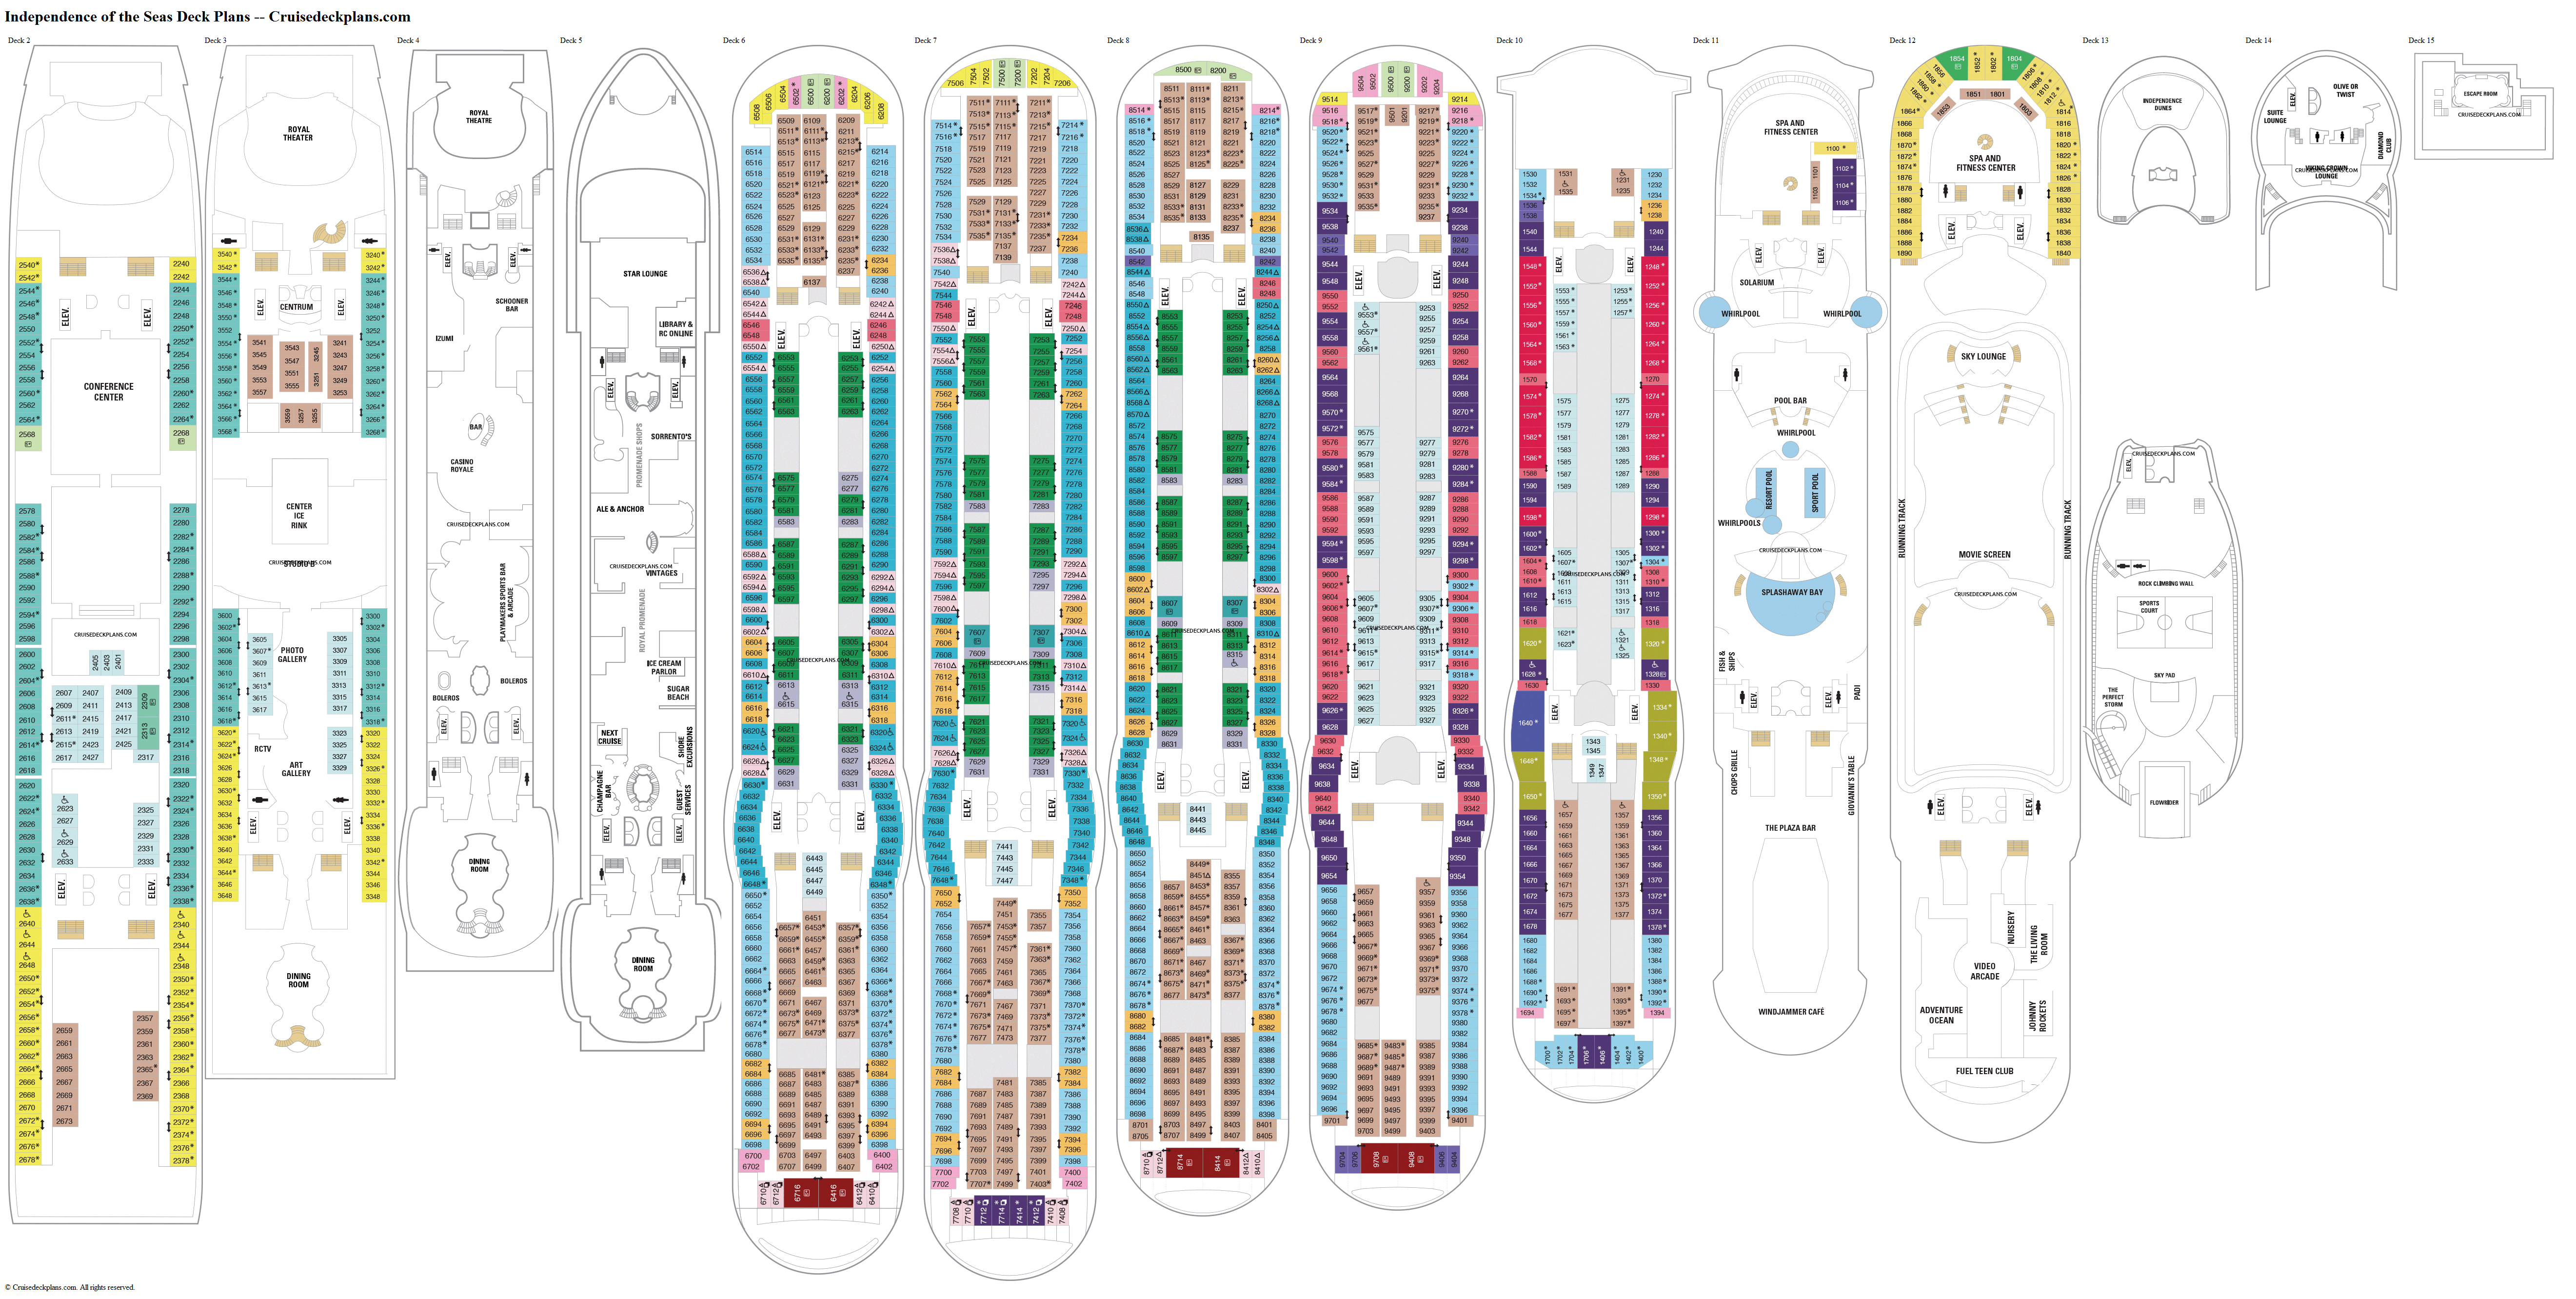 Independence of the Seas Deck Plans, Diagrams, Pictures, Video